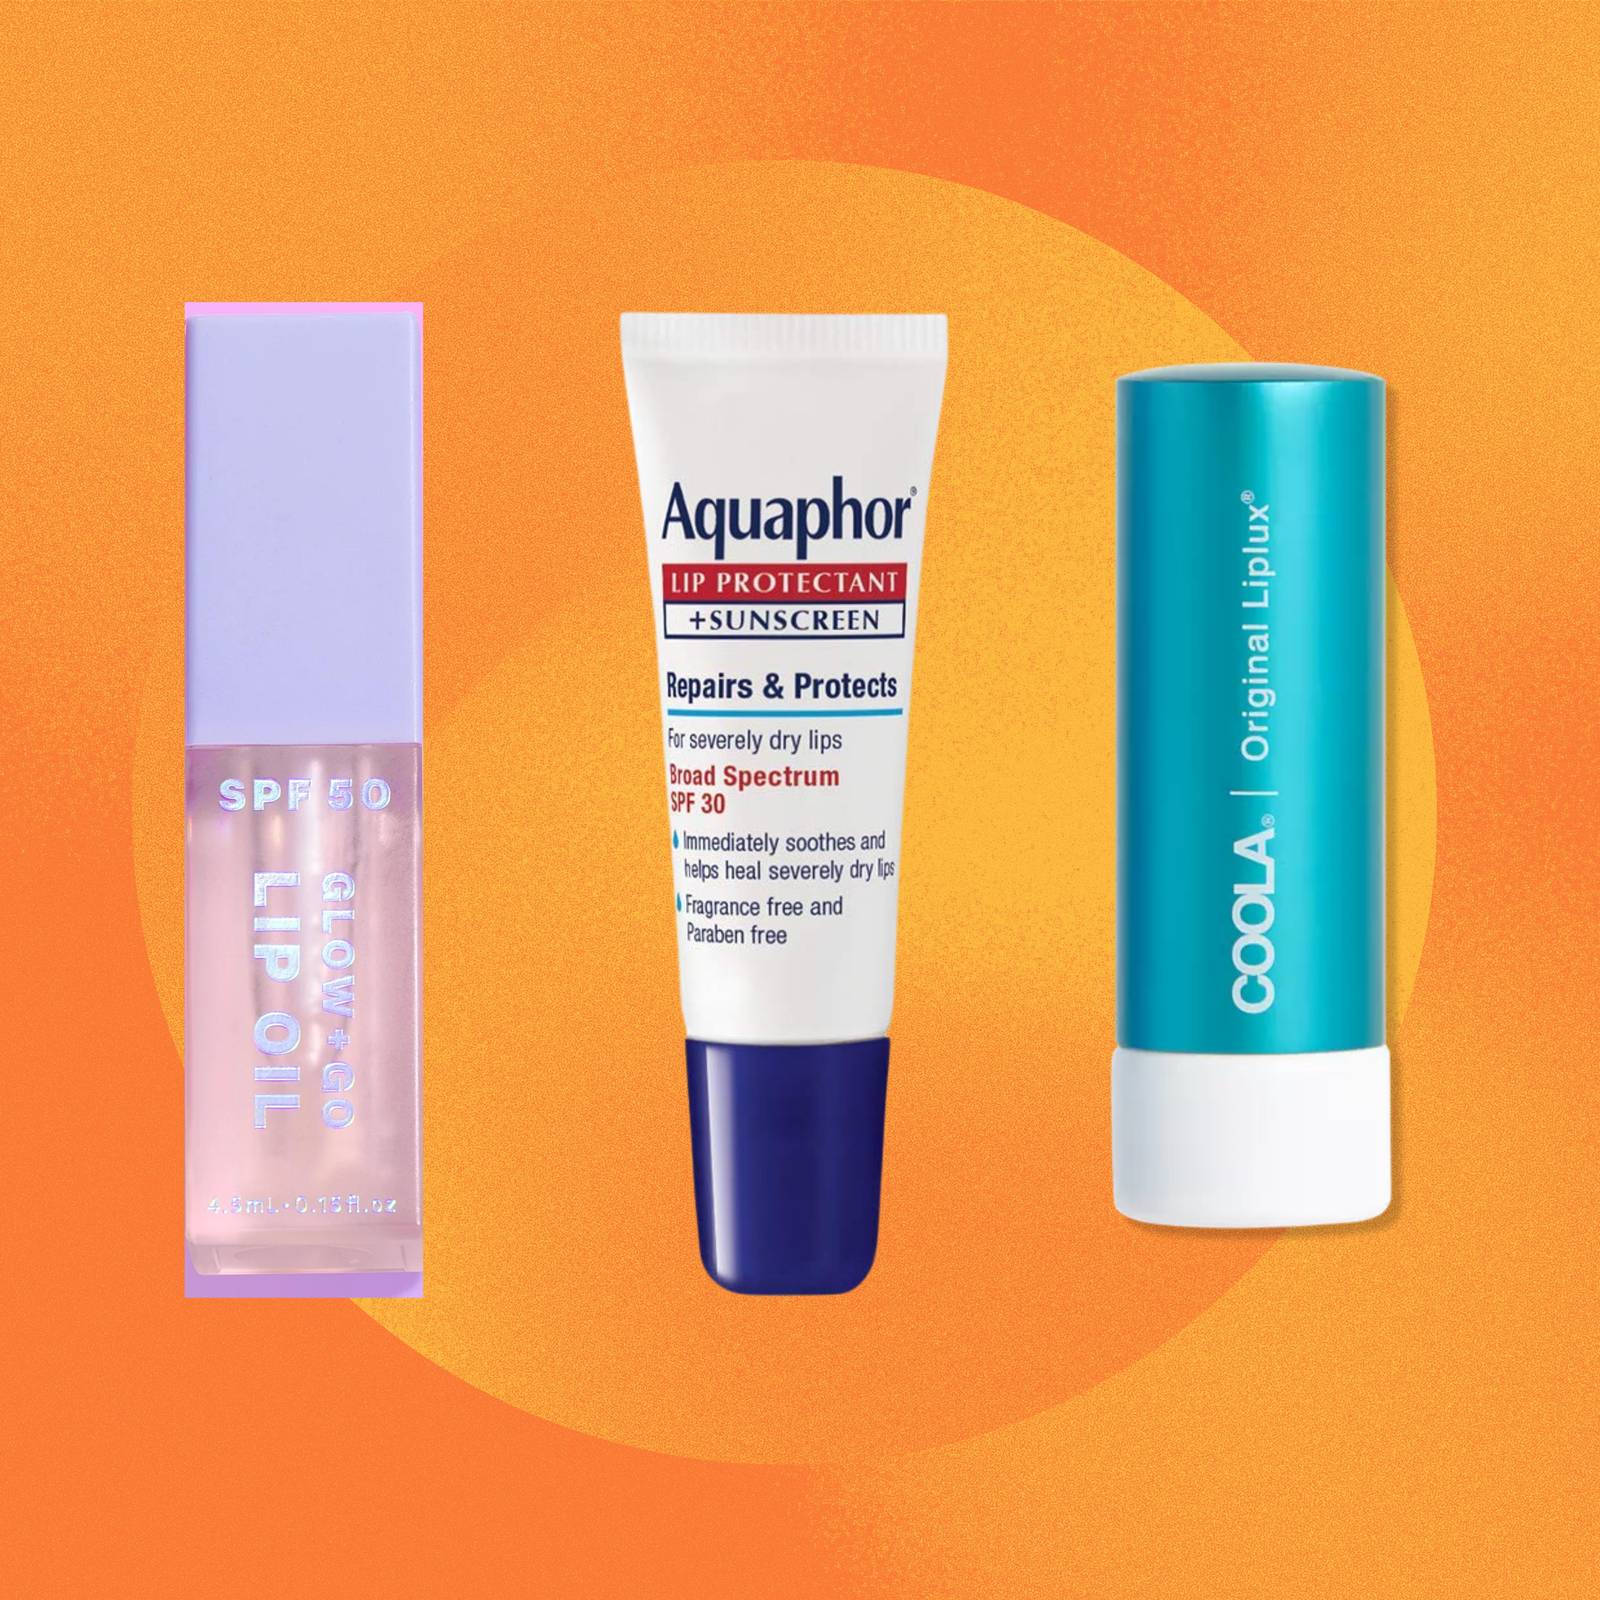 8 Dermatologist-Approved Lip Balms With SPF